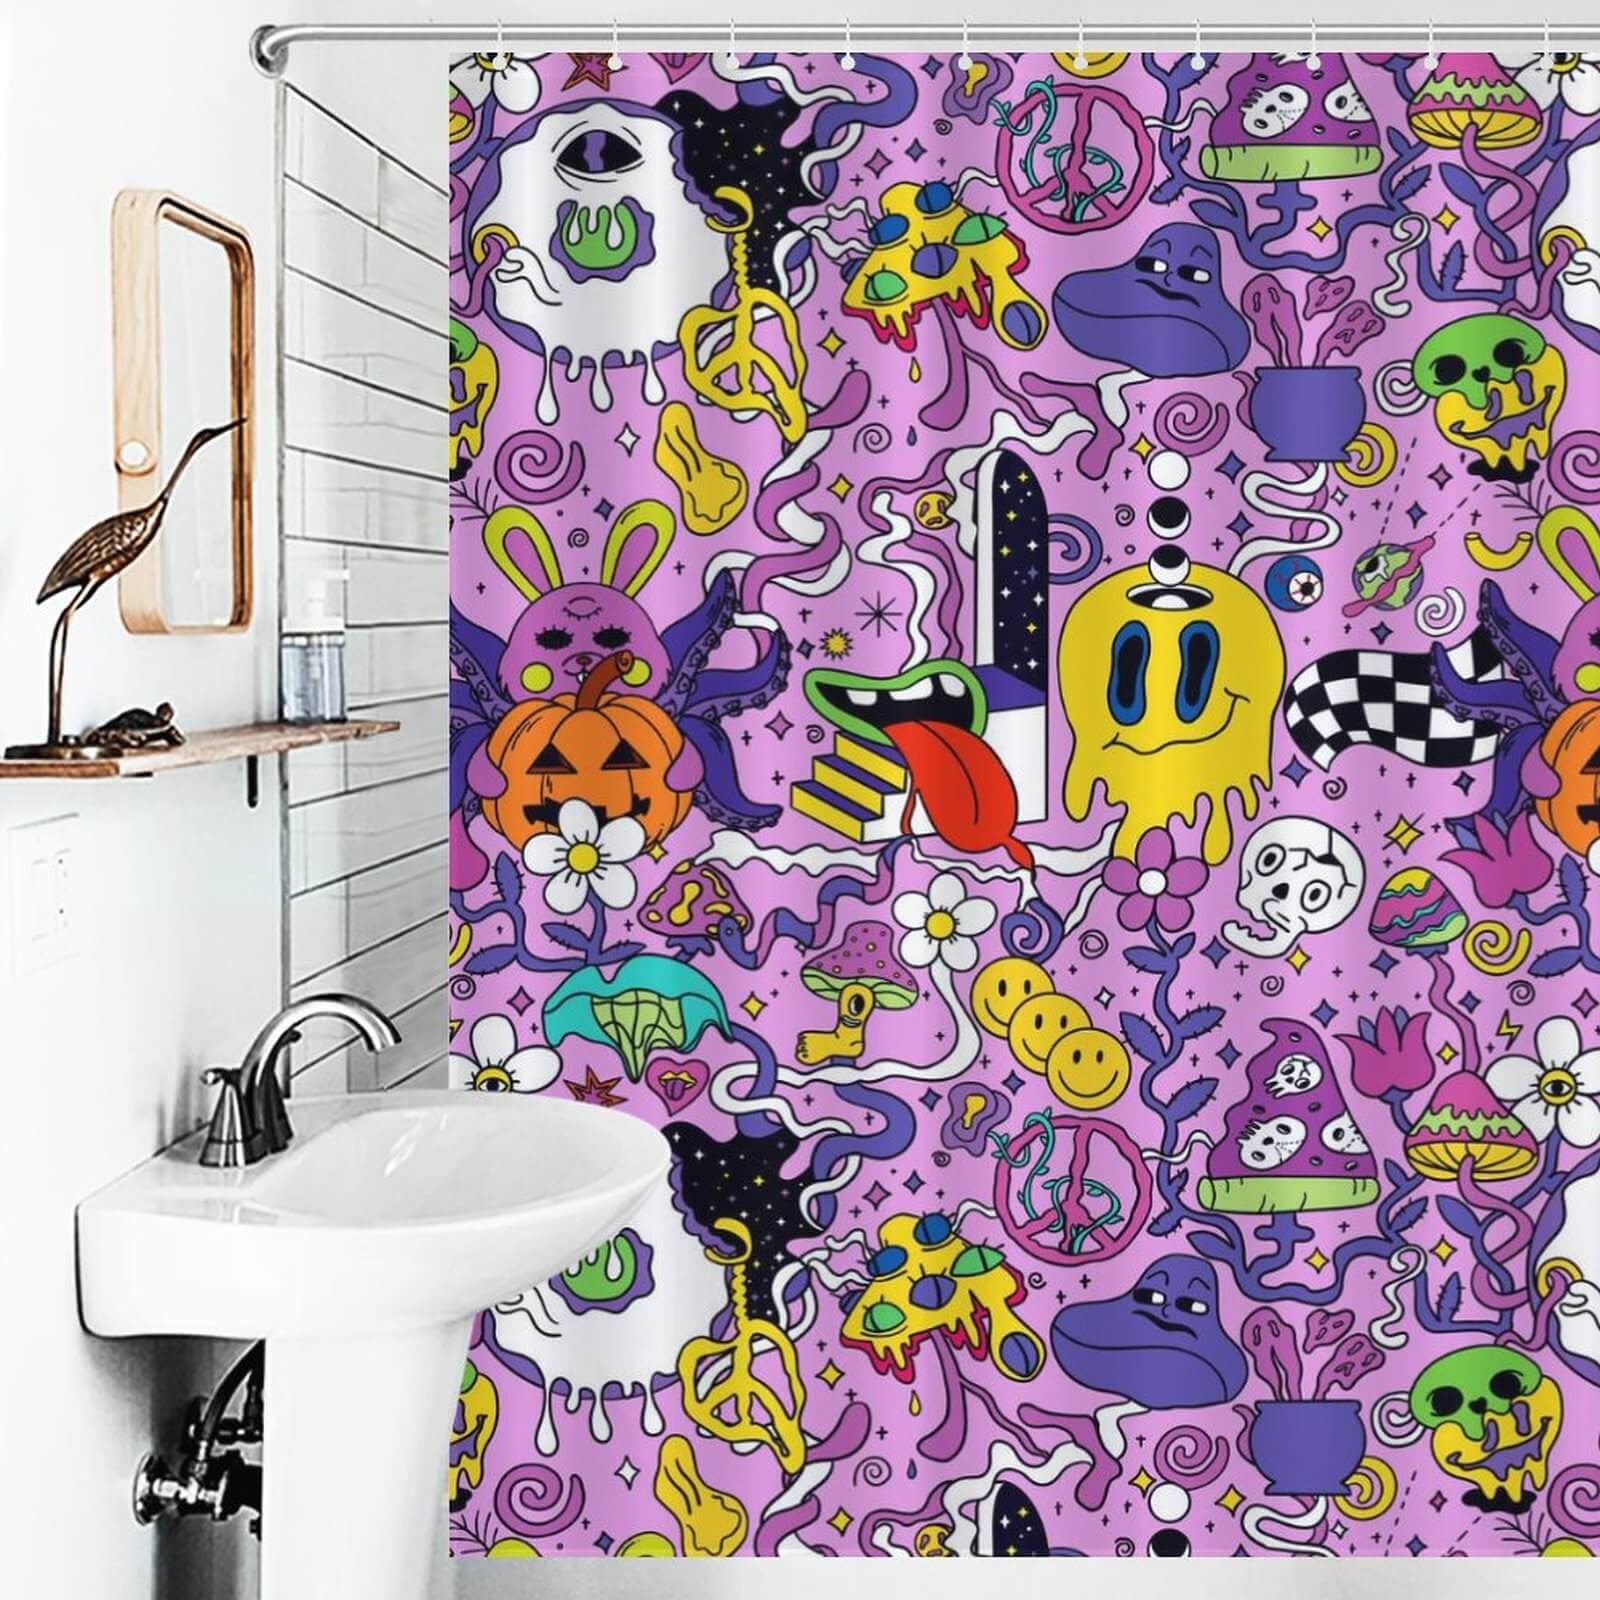 A Cotton Cat Psychedelic Trippy Shower Curtain with a lot of cartoon characters and a psychedelic design in purple.